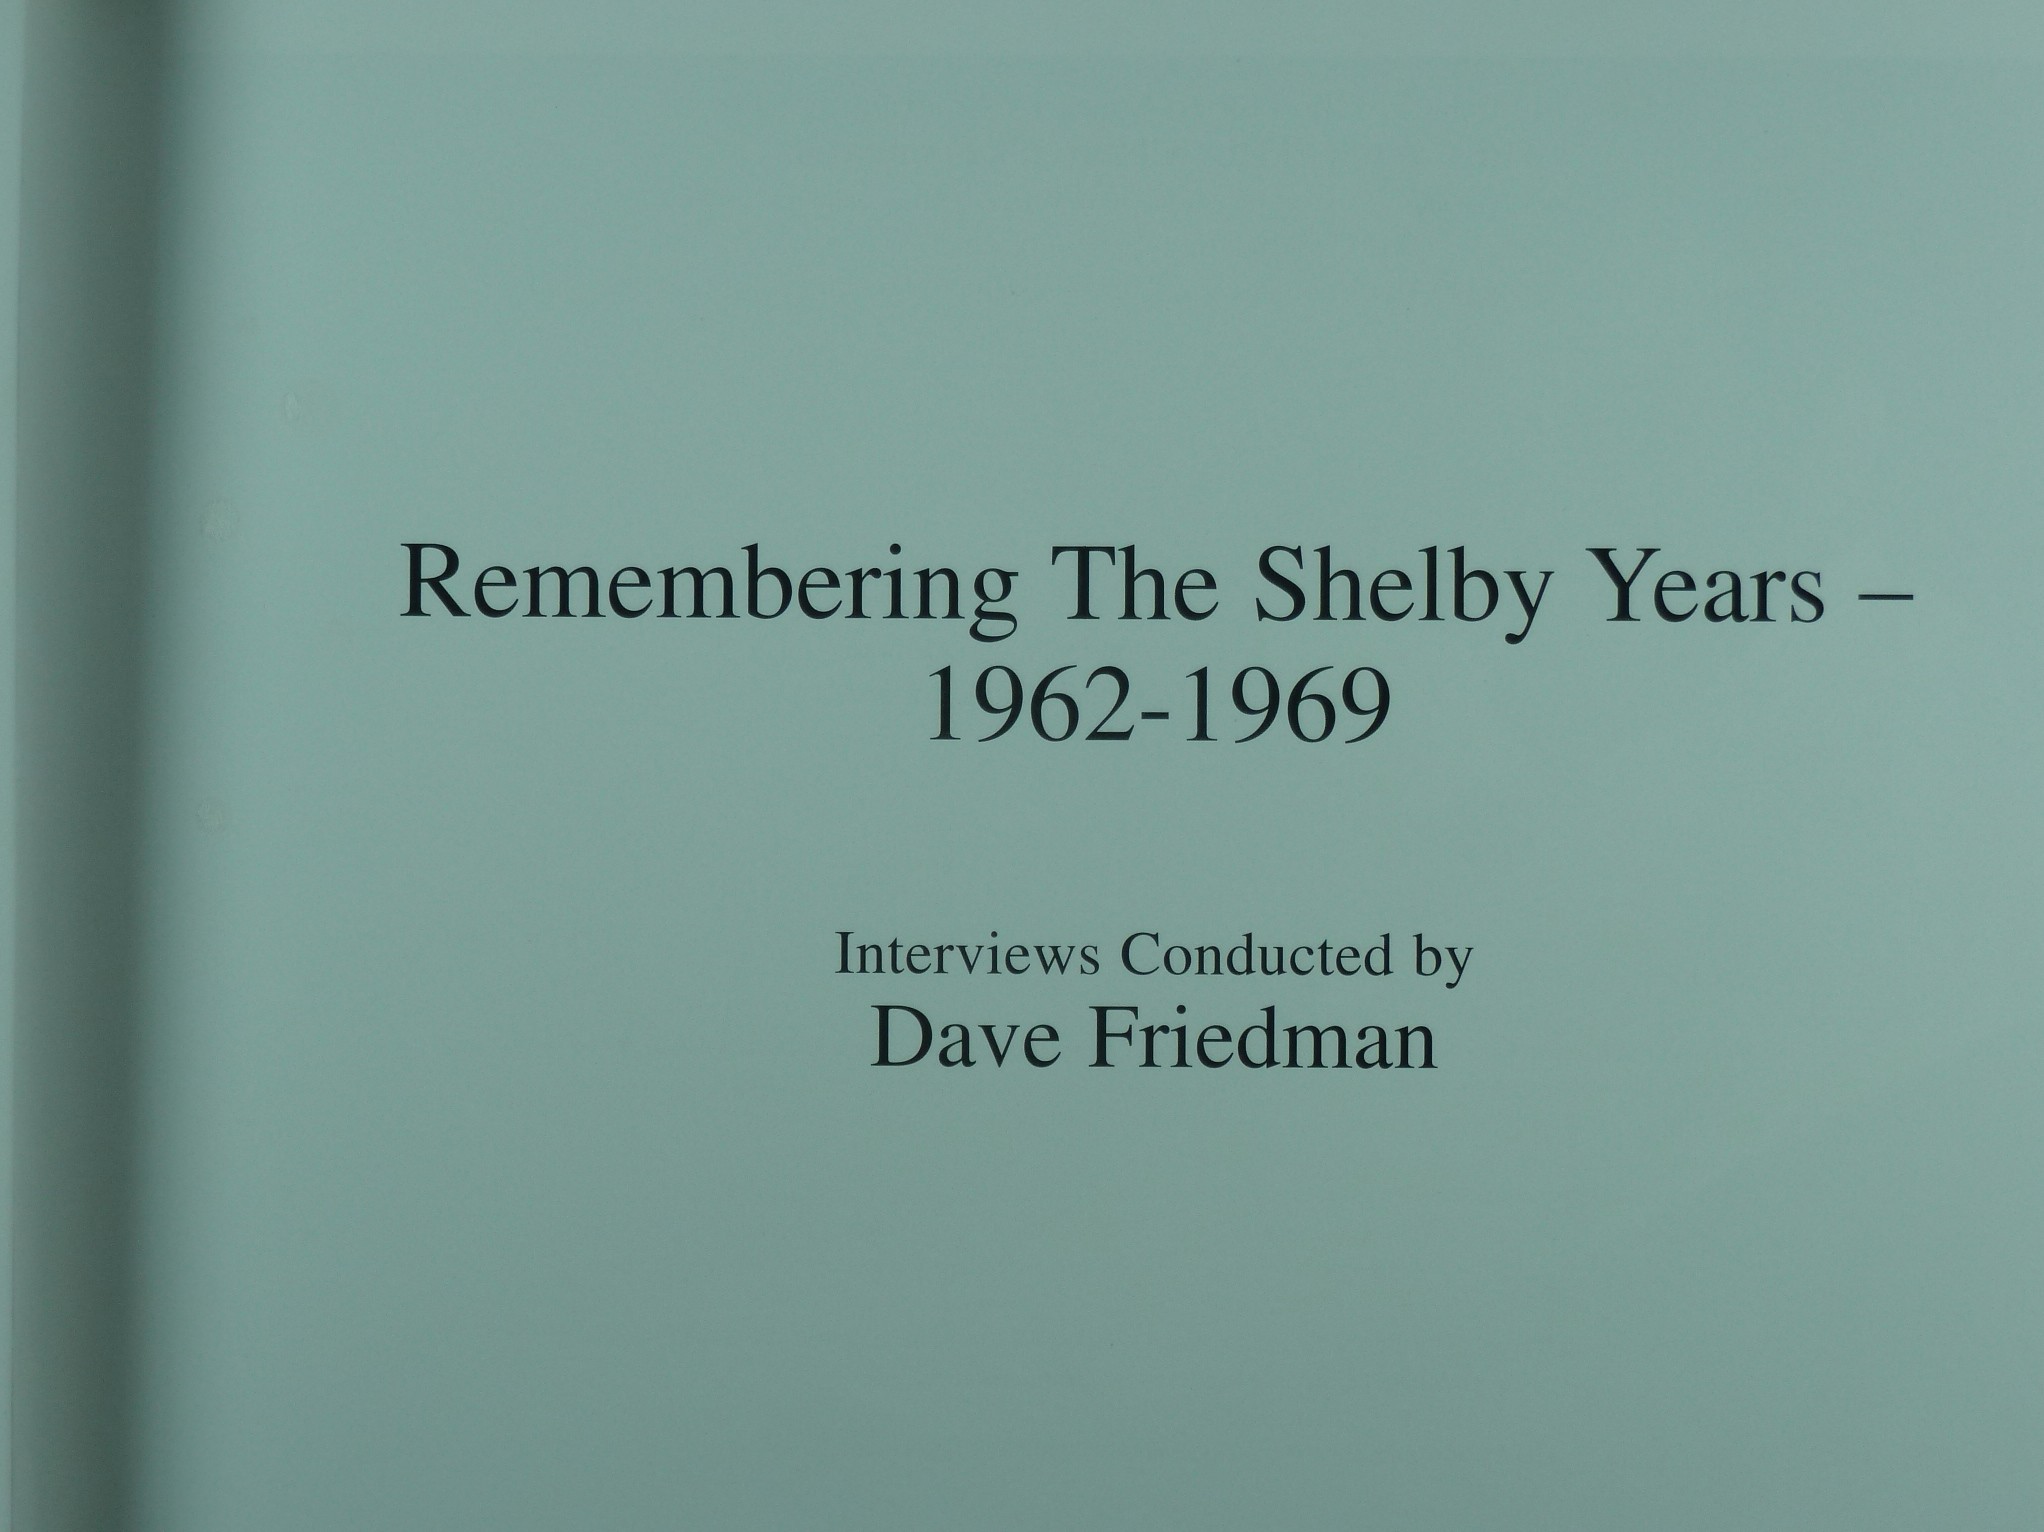 Remembering the Shelby years - 1962-1969